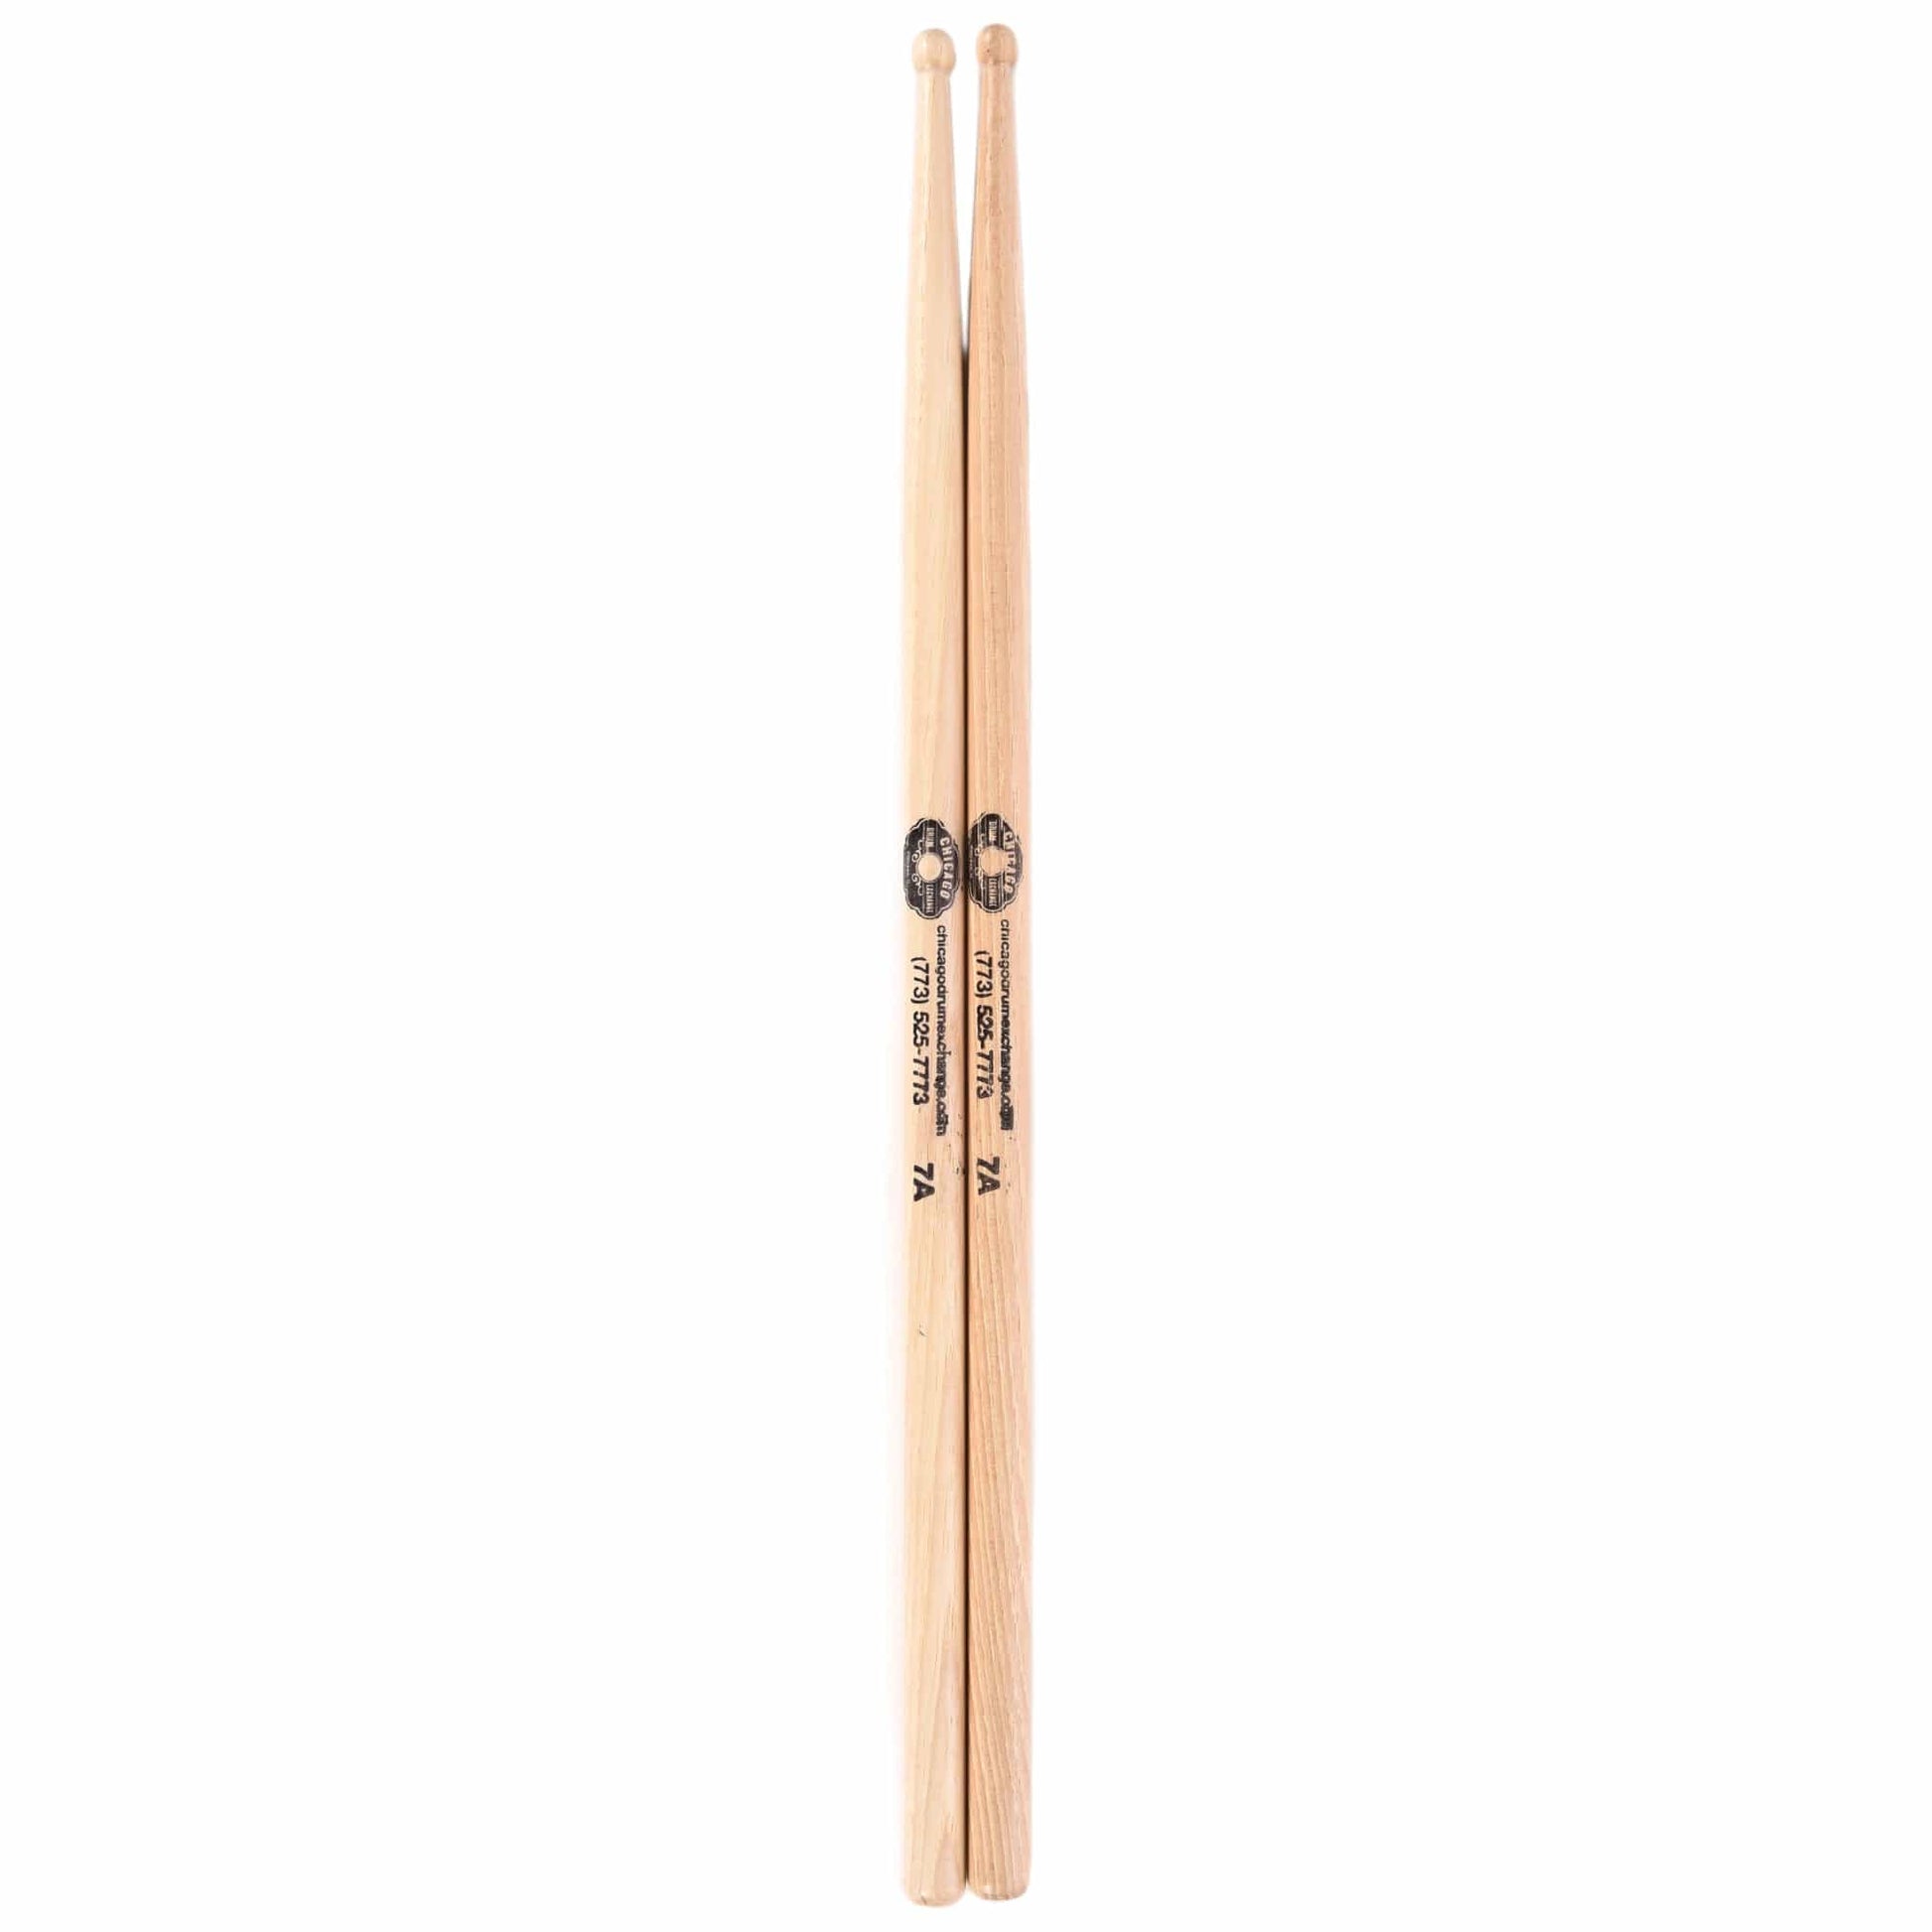 Chicago Drum Exchange CDE 7A Vater 2nd Quality Wood Tip Custom Imprint Drum Sticks (6 Pair Bundle) Drums and Percussion / Parts and Accessories / Drum Sticks and Mallets